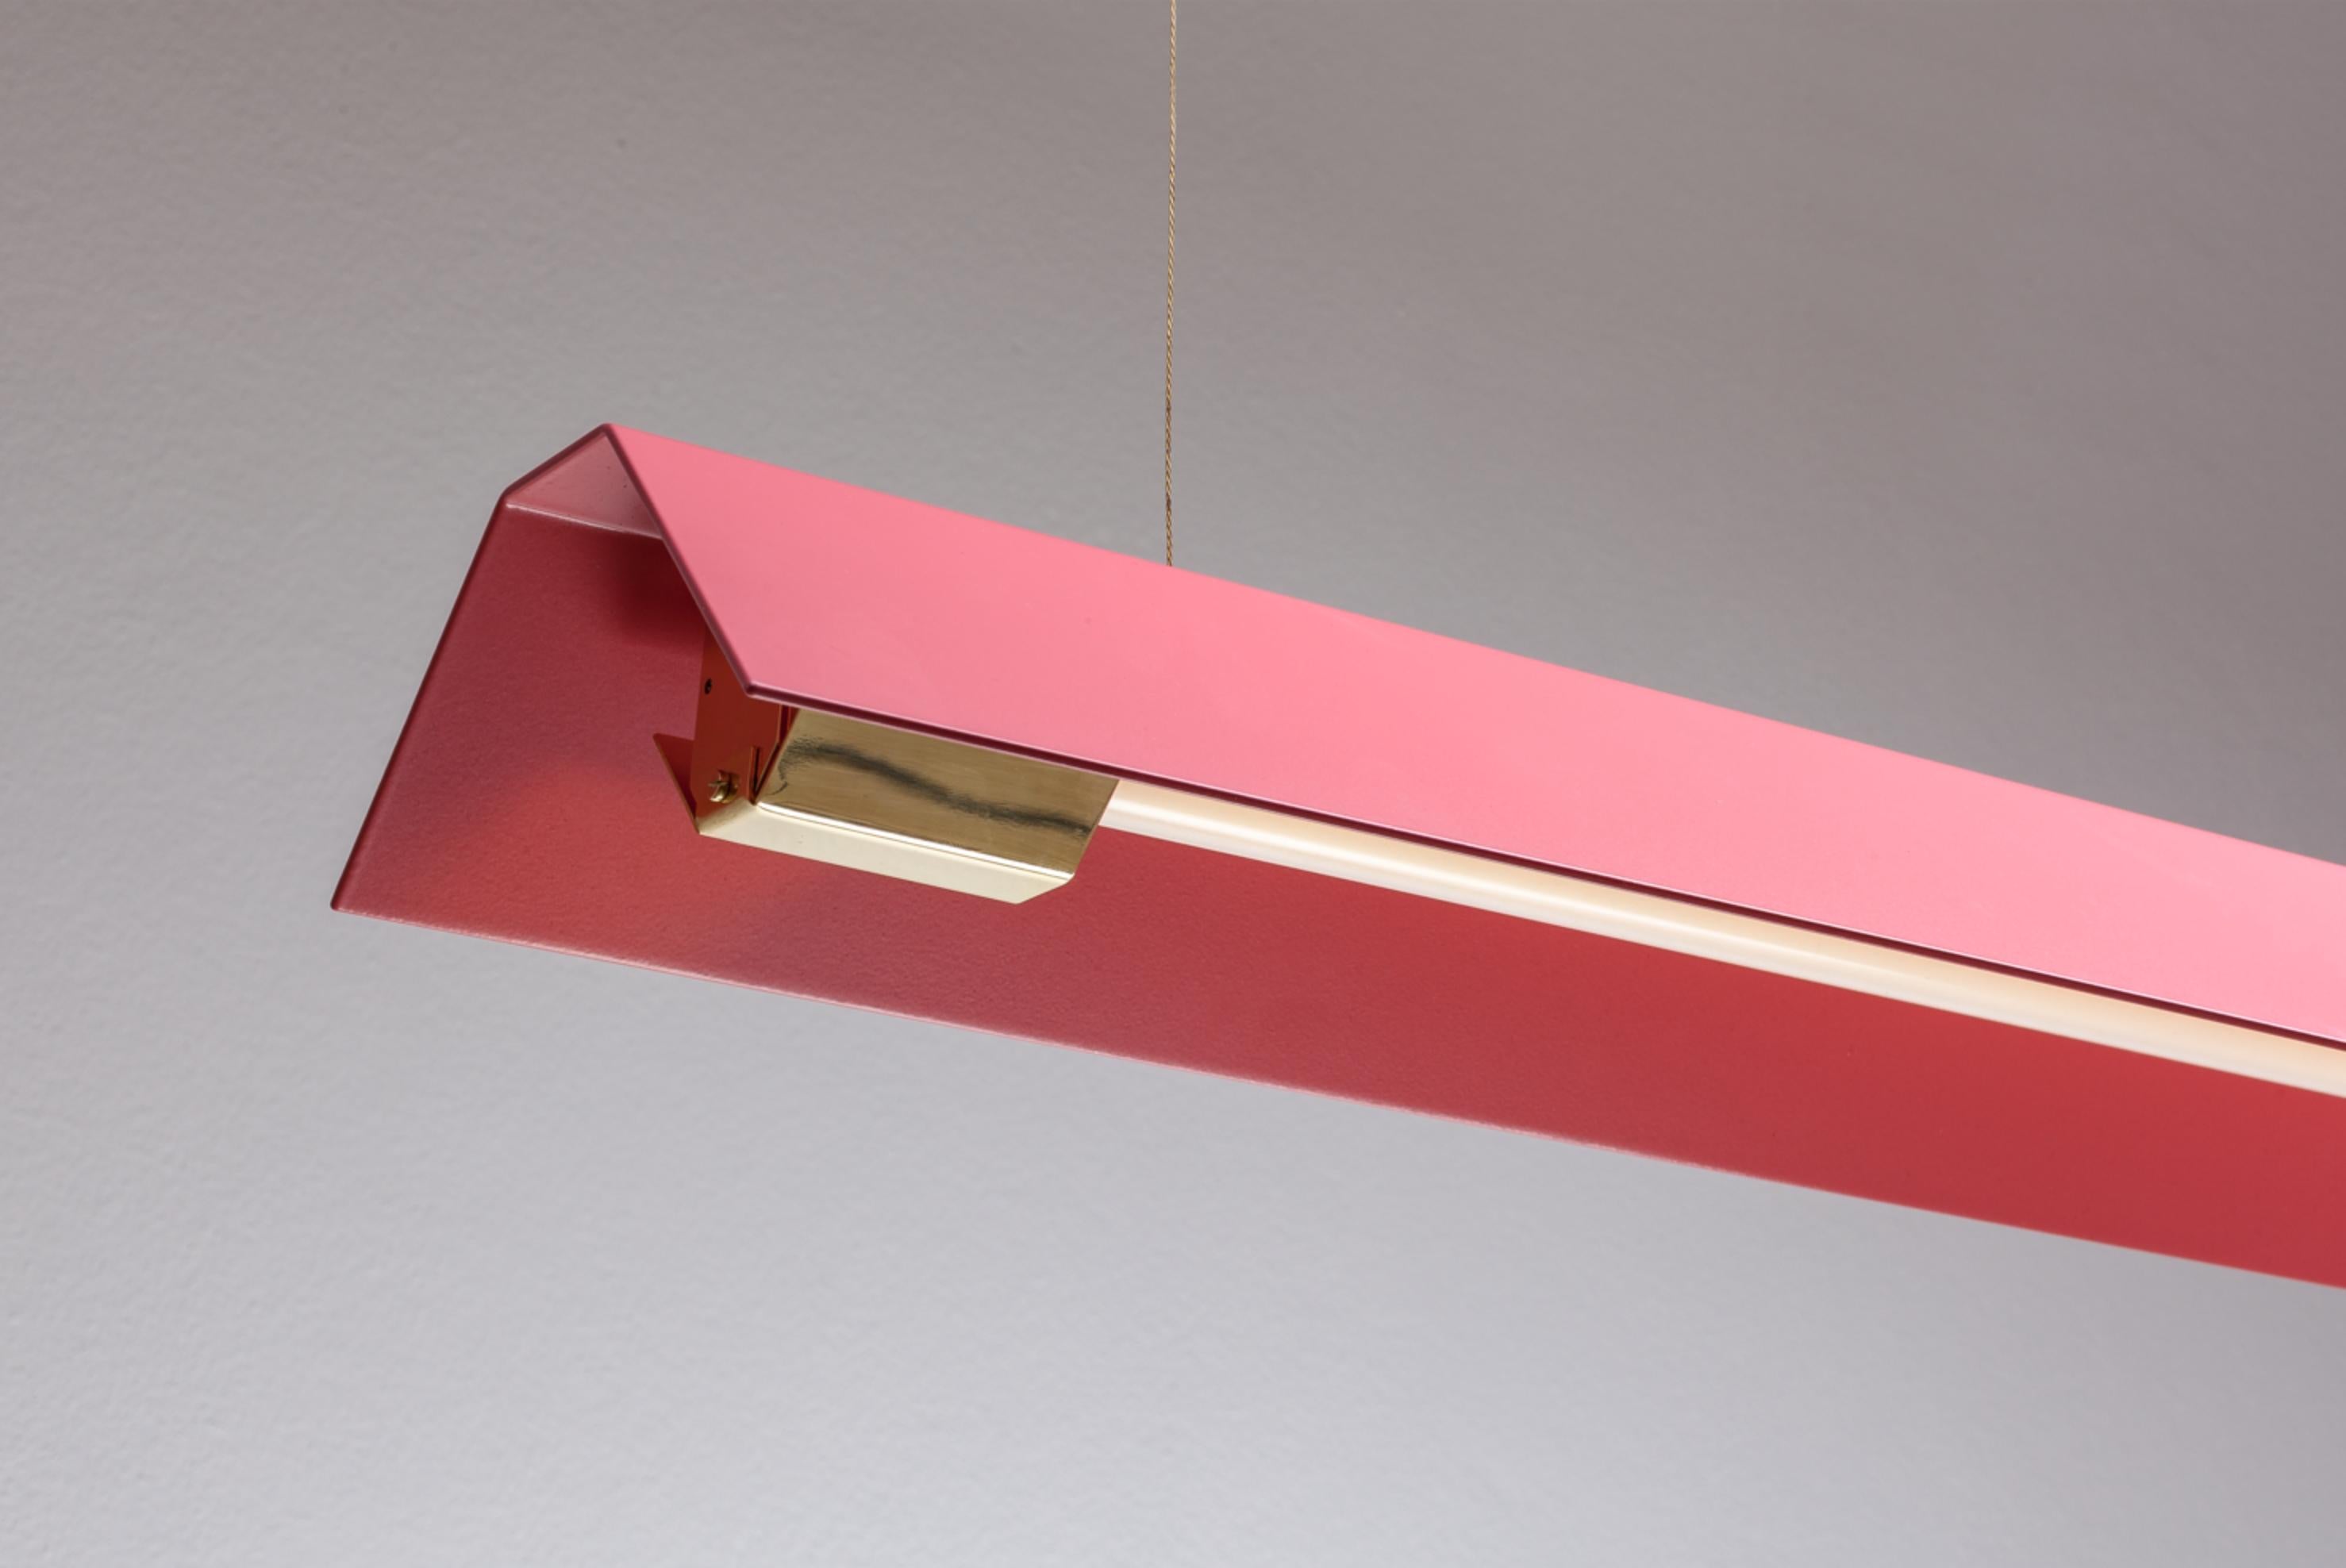 Large Misalliance Ex antique pink suspended light by Lexavala
Dimensions: D 16 x W 130 x H 8 cm
Materials: powder coated shade with details made of brass or stainless steel.

There are two lenghts of socket covers, extending over the LED. Two